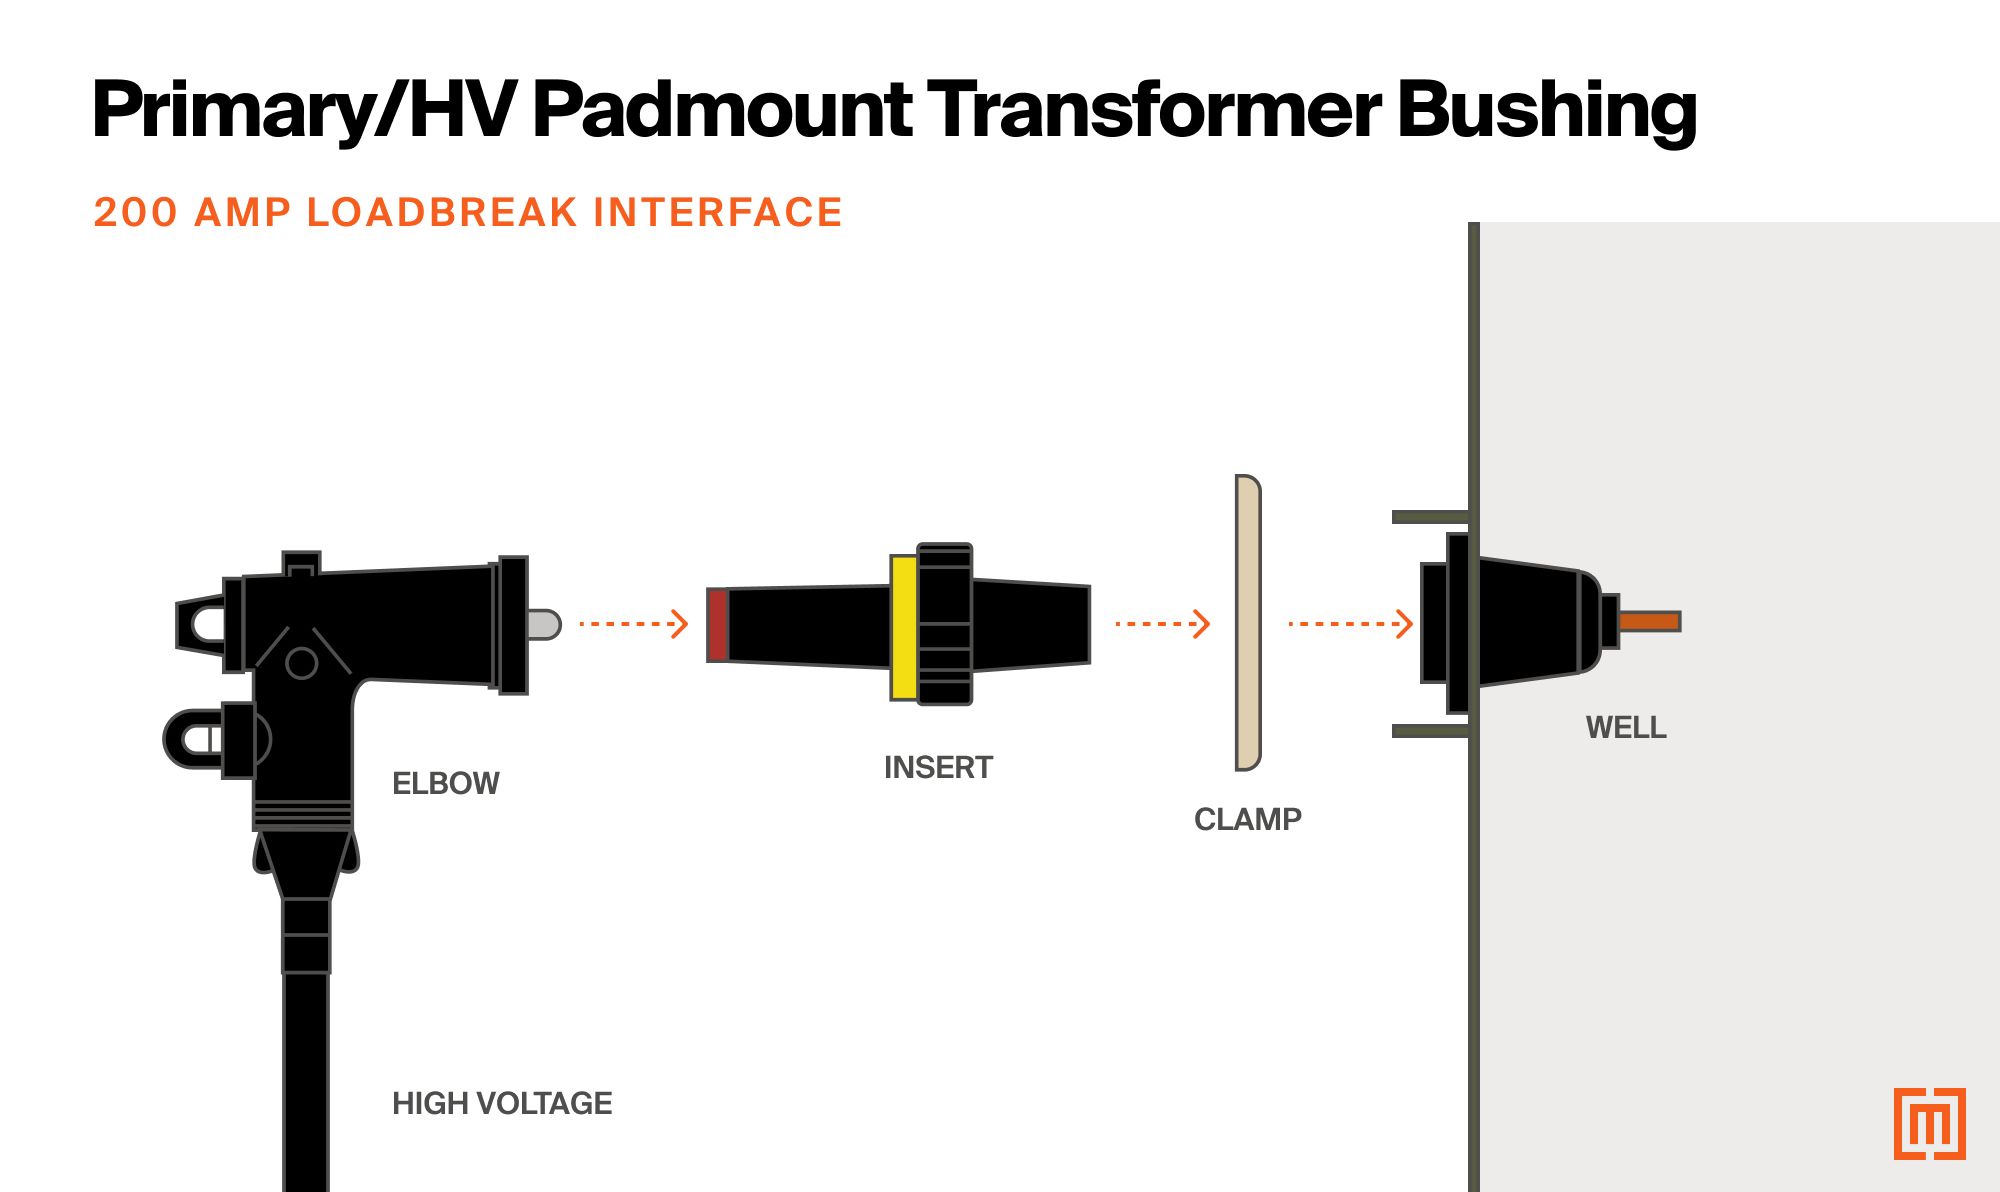 A diagram of a padmount transformer primary high voltage 200 amp loadbreak interface